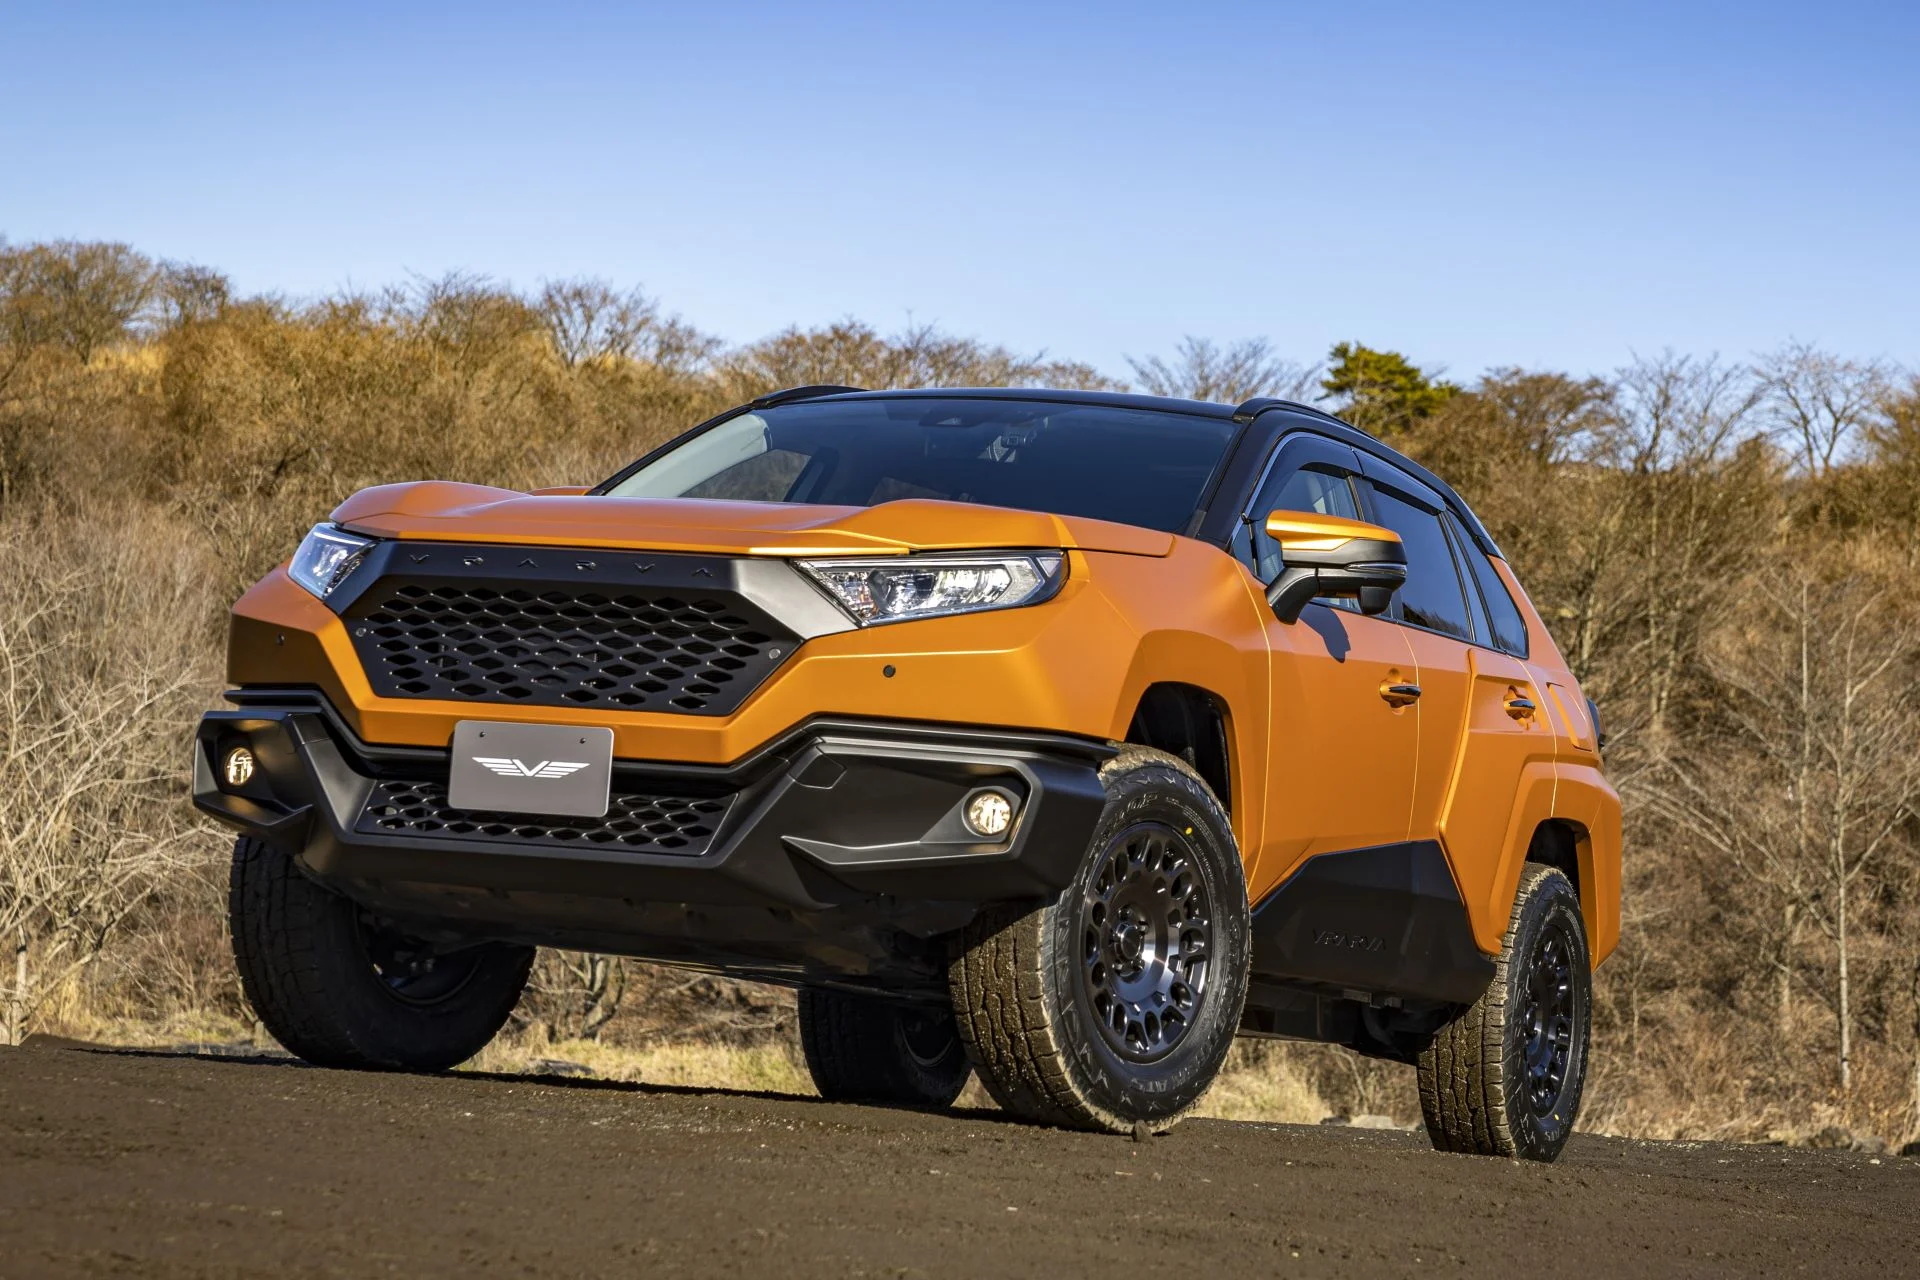 Toyota RAV4 Gains More Rugged Looks Thanks To A New Bodykit By Kuhl